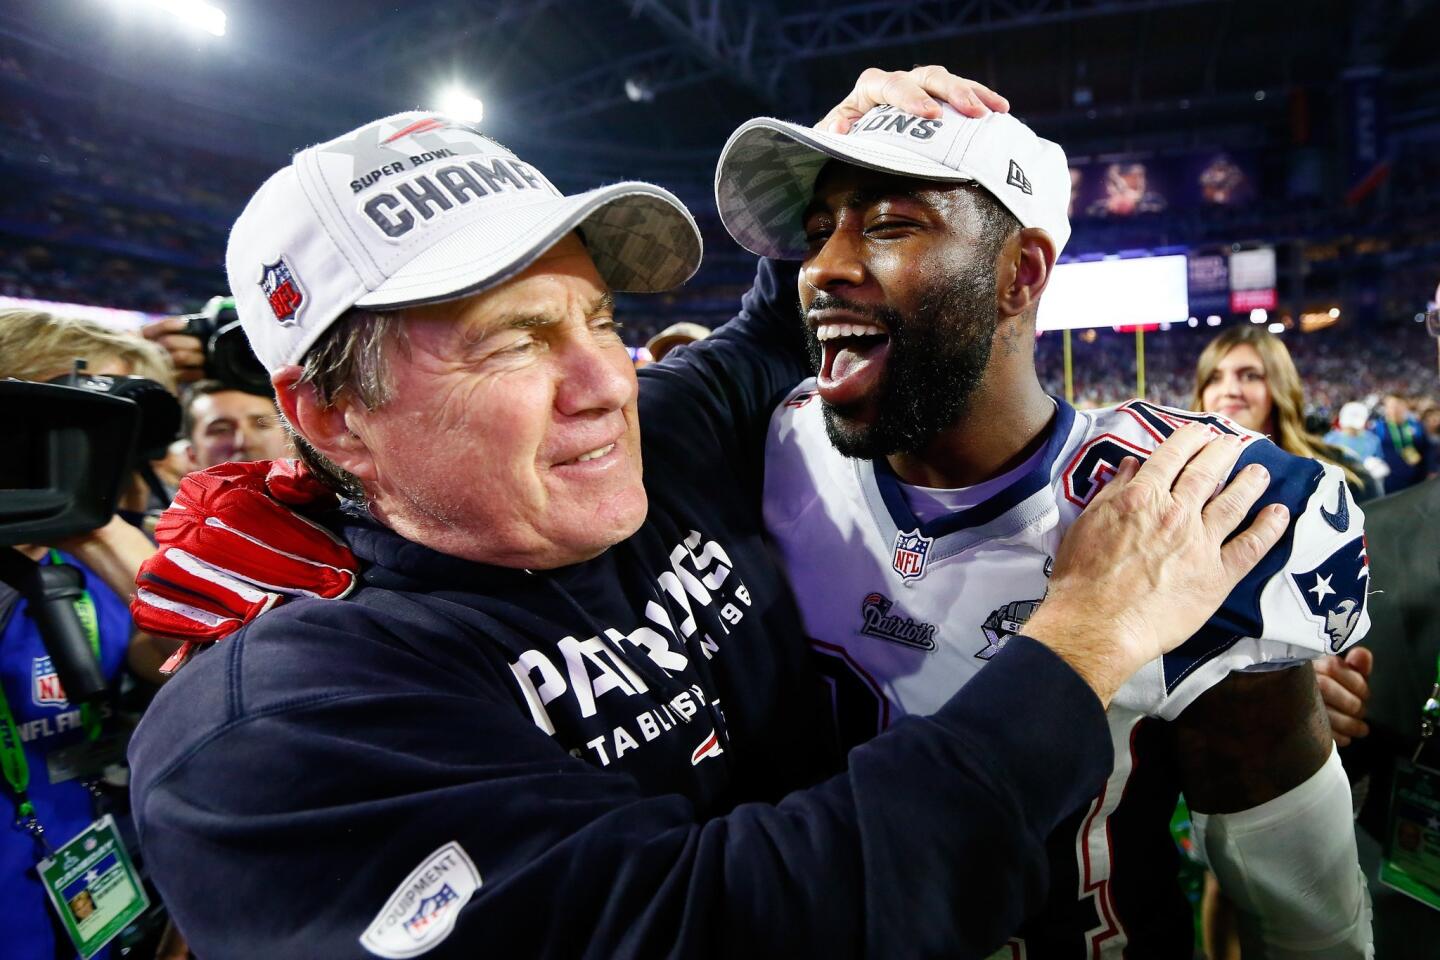 Patriots coach Bill Belichick celebrates with Darrelle Revis after the win.